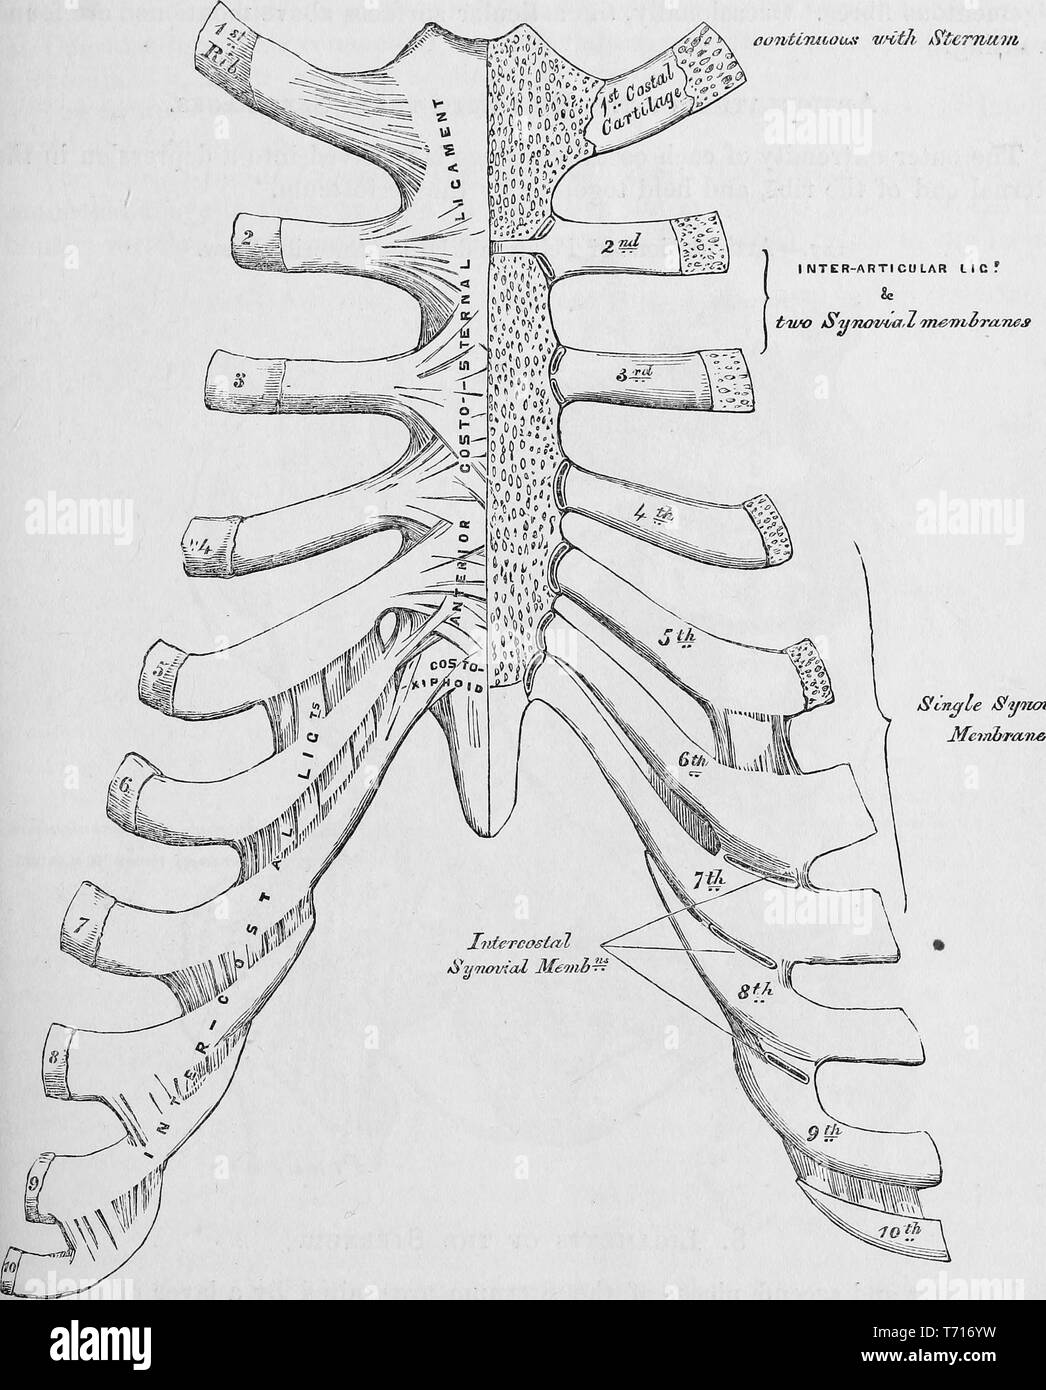 Illustrated anterior view of sternocostal and interchondral articulations (joints), from the book 'Anatomy, descriptive and surgical' by Henry Gray, Henry Vandyke Carter, and John Guise Westmacott, 1860. Courtesy Internet Archive. () Stock Photo